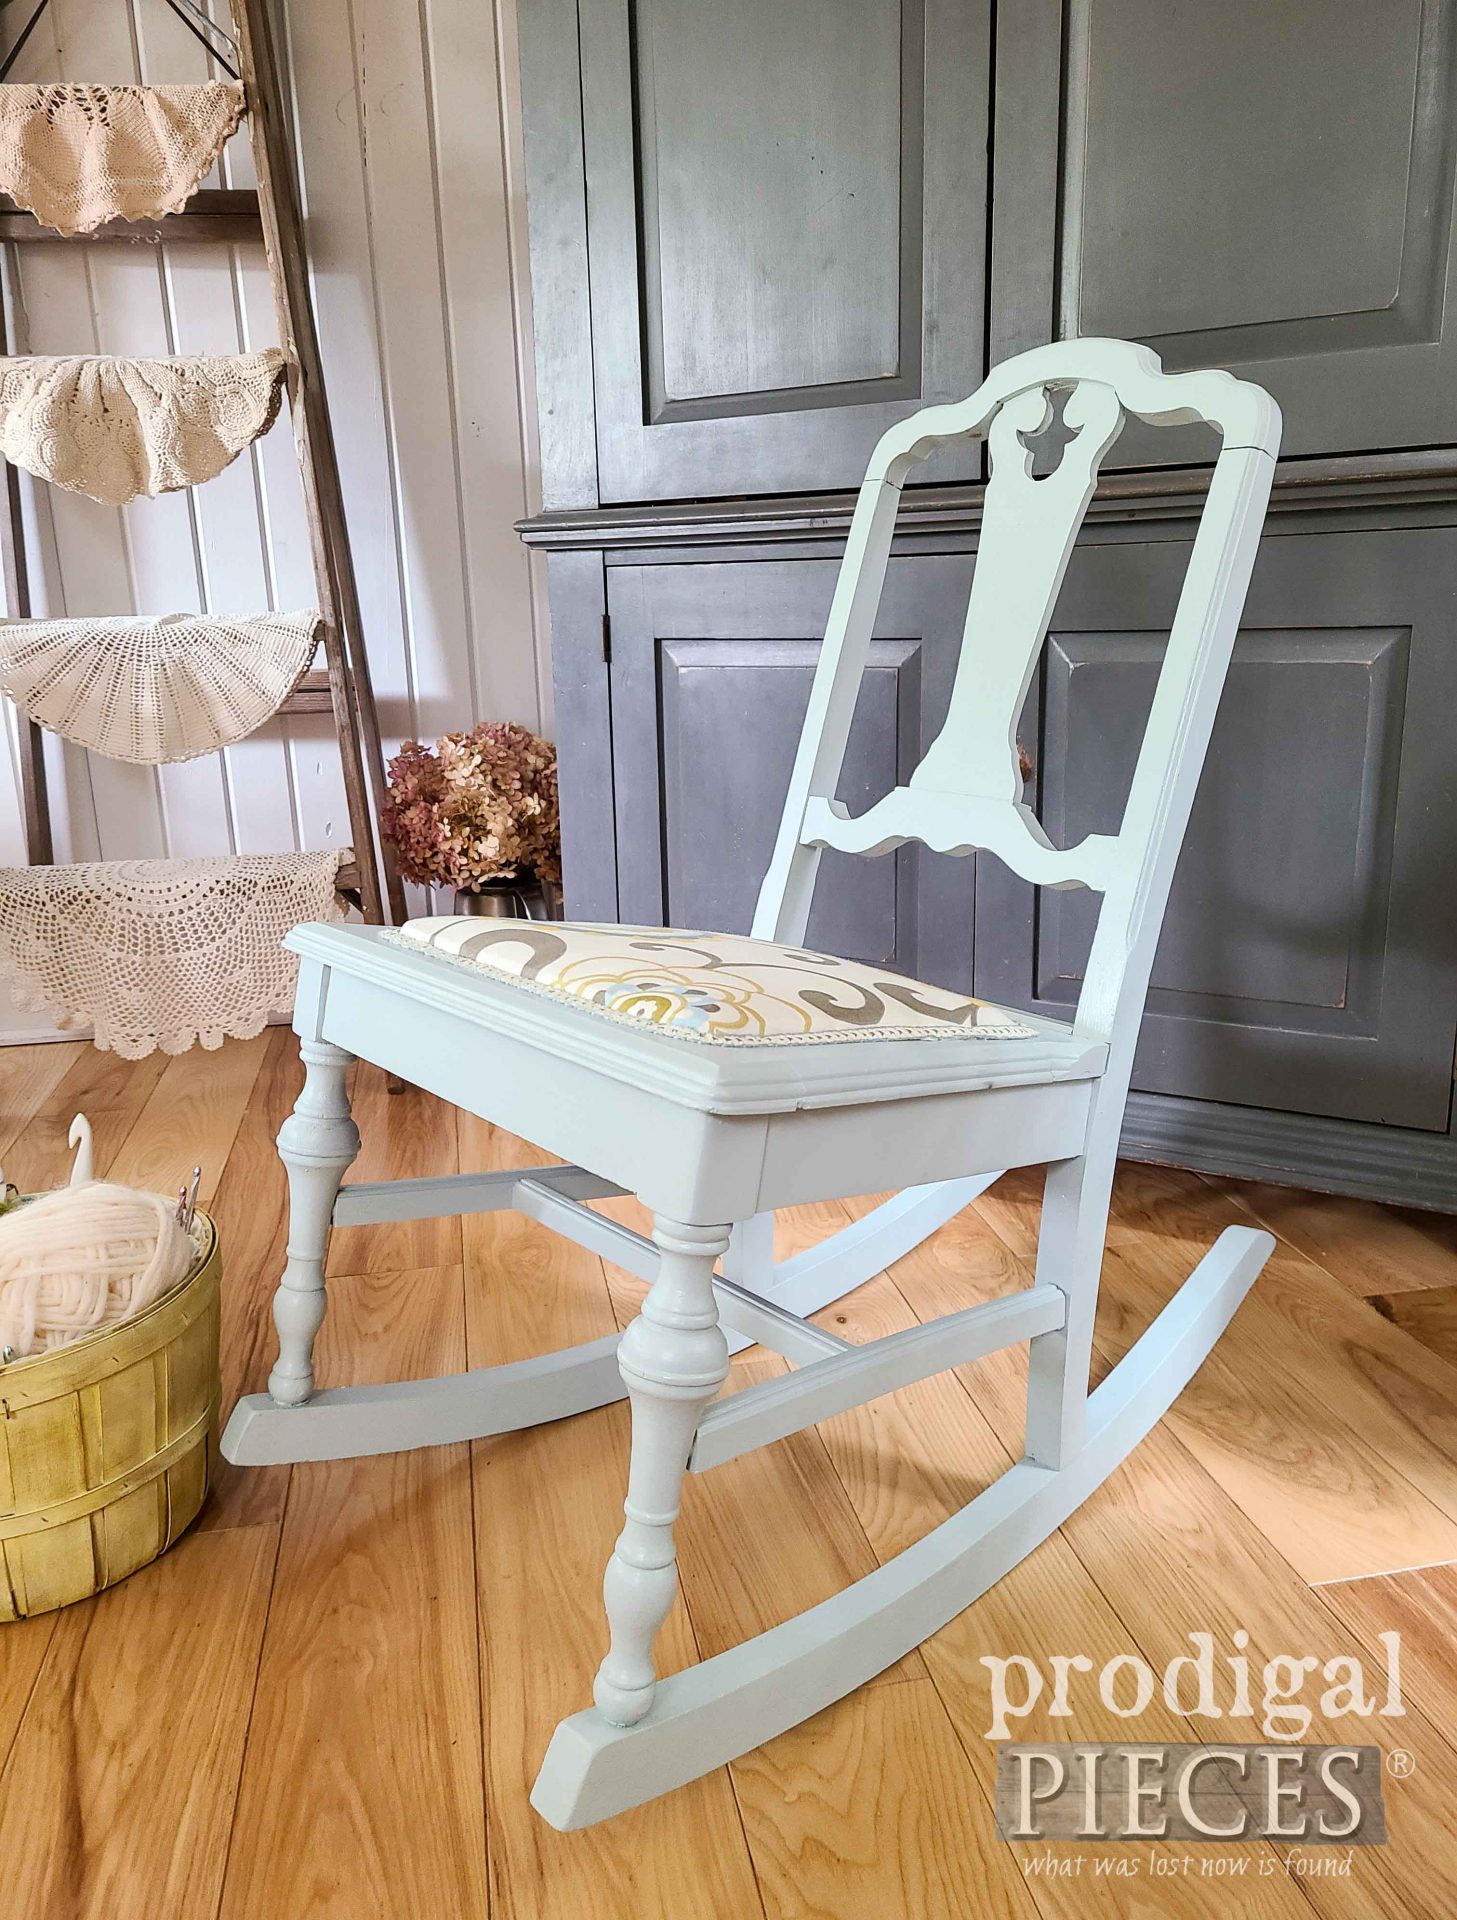 Side View of Broken Antique Rocking Chair Repaired by Larissa of Prodigal Pieces | prodigalpieces.com #prodigalpieces #antique #furniture #homedecor